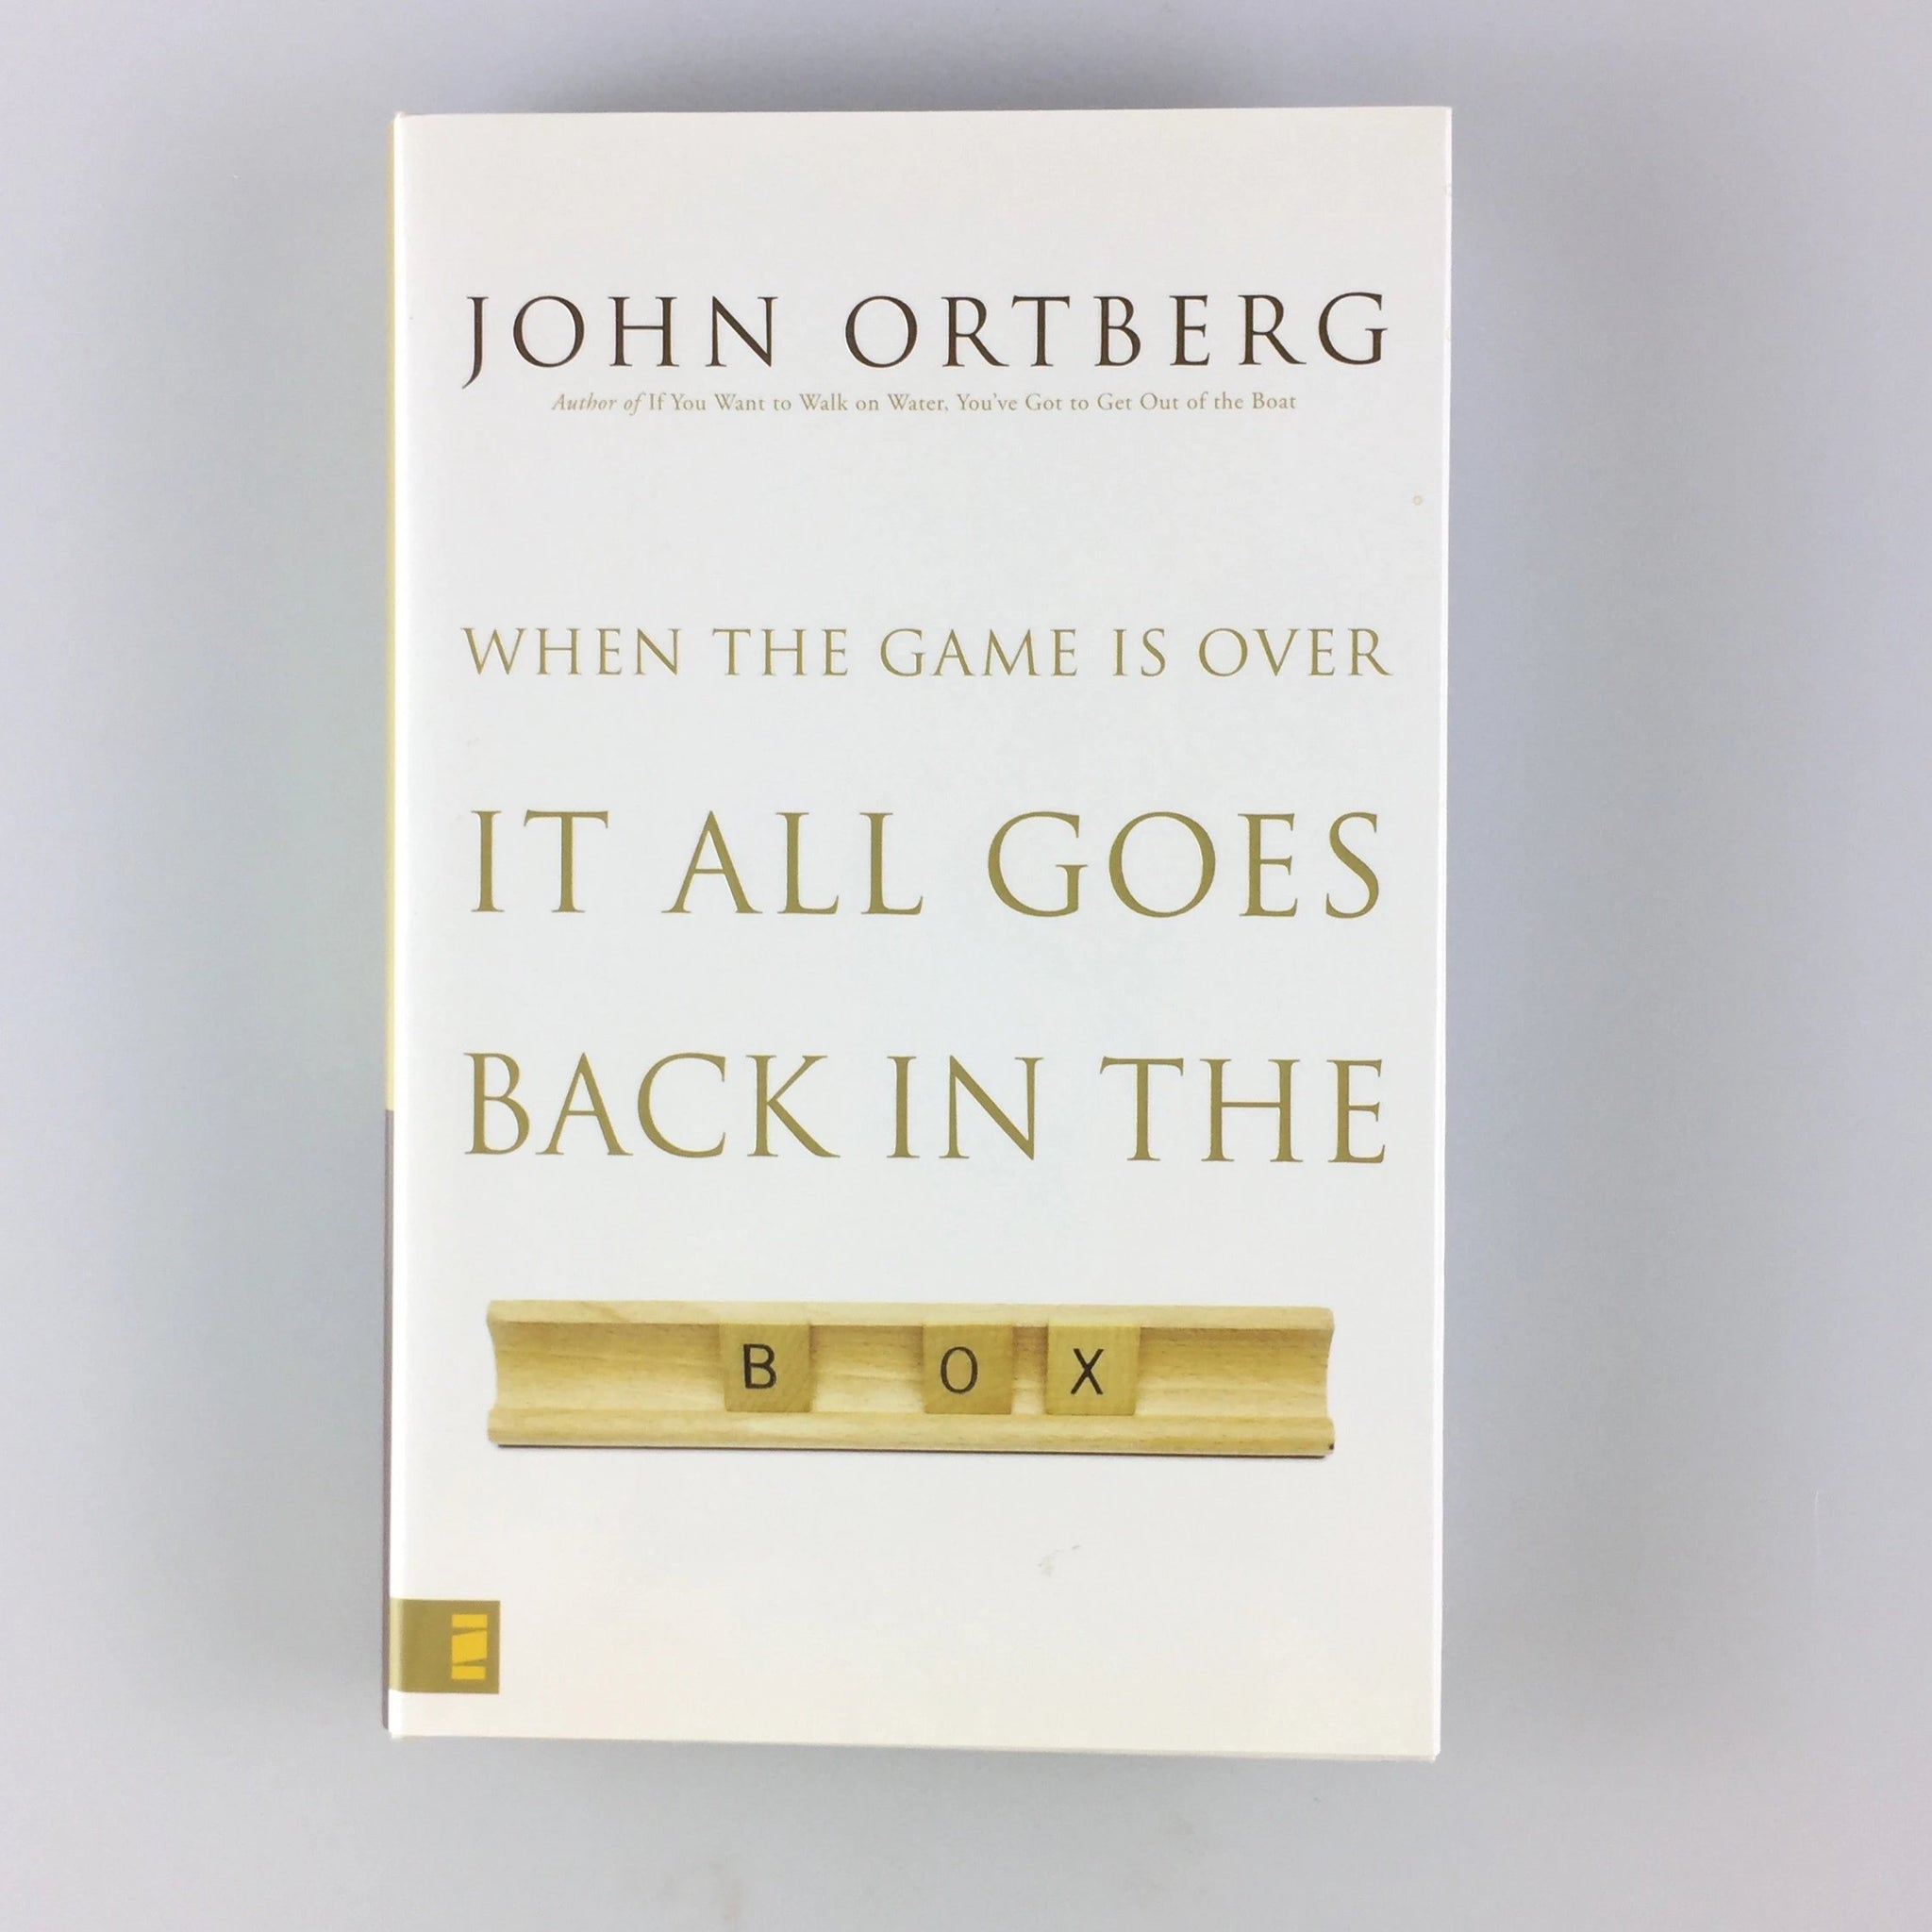 When the Game Is over, It All Goes Back in the Box by John Ortberg (2007)